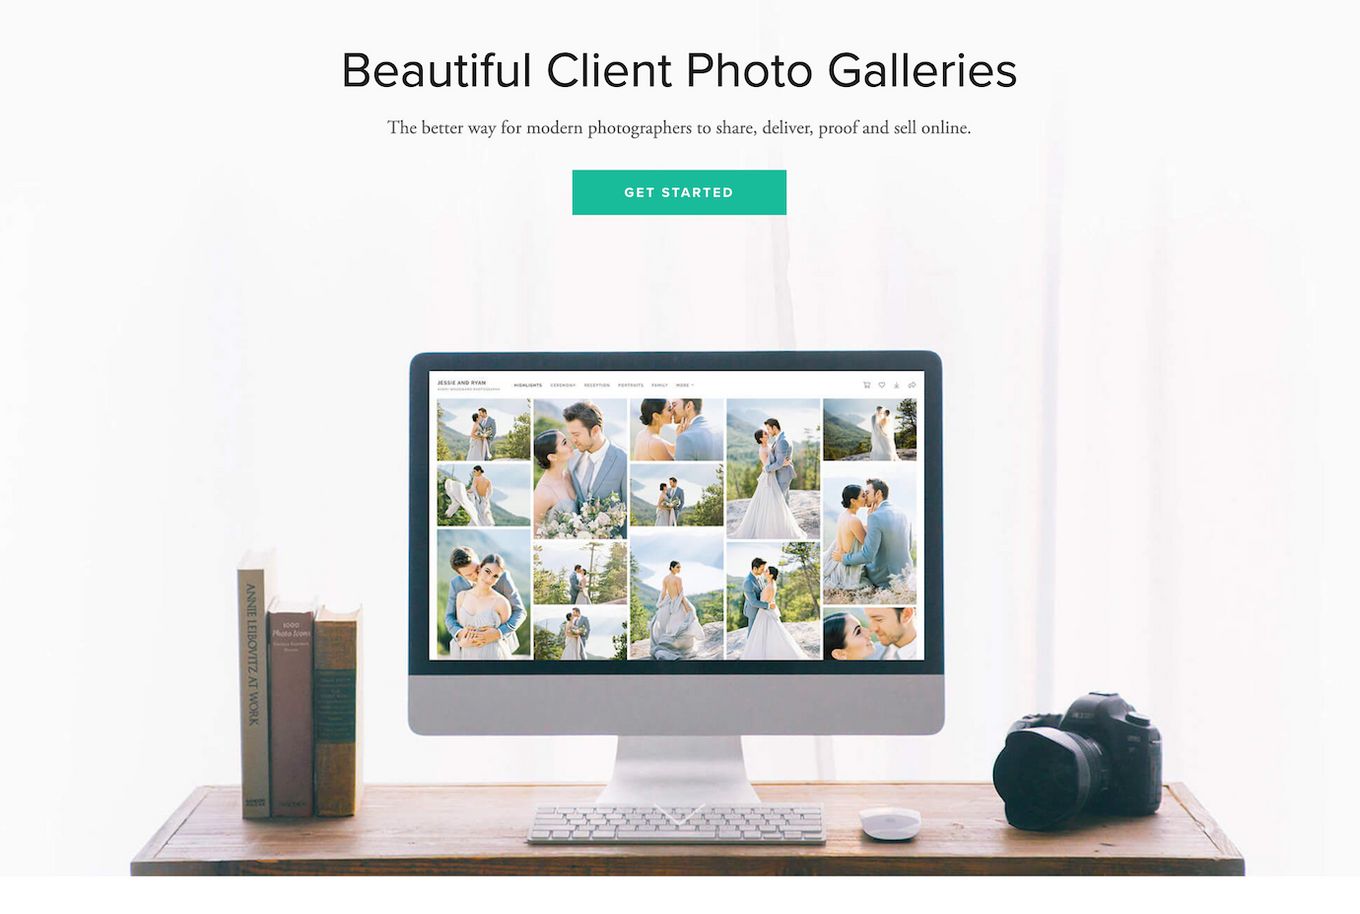 Pixieset - A Simple And Great Website Builder For Photographers